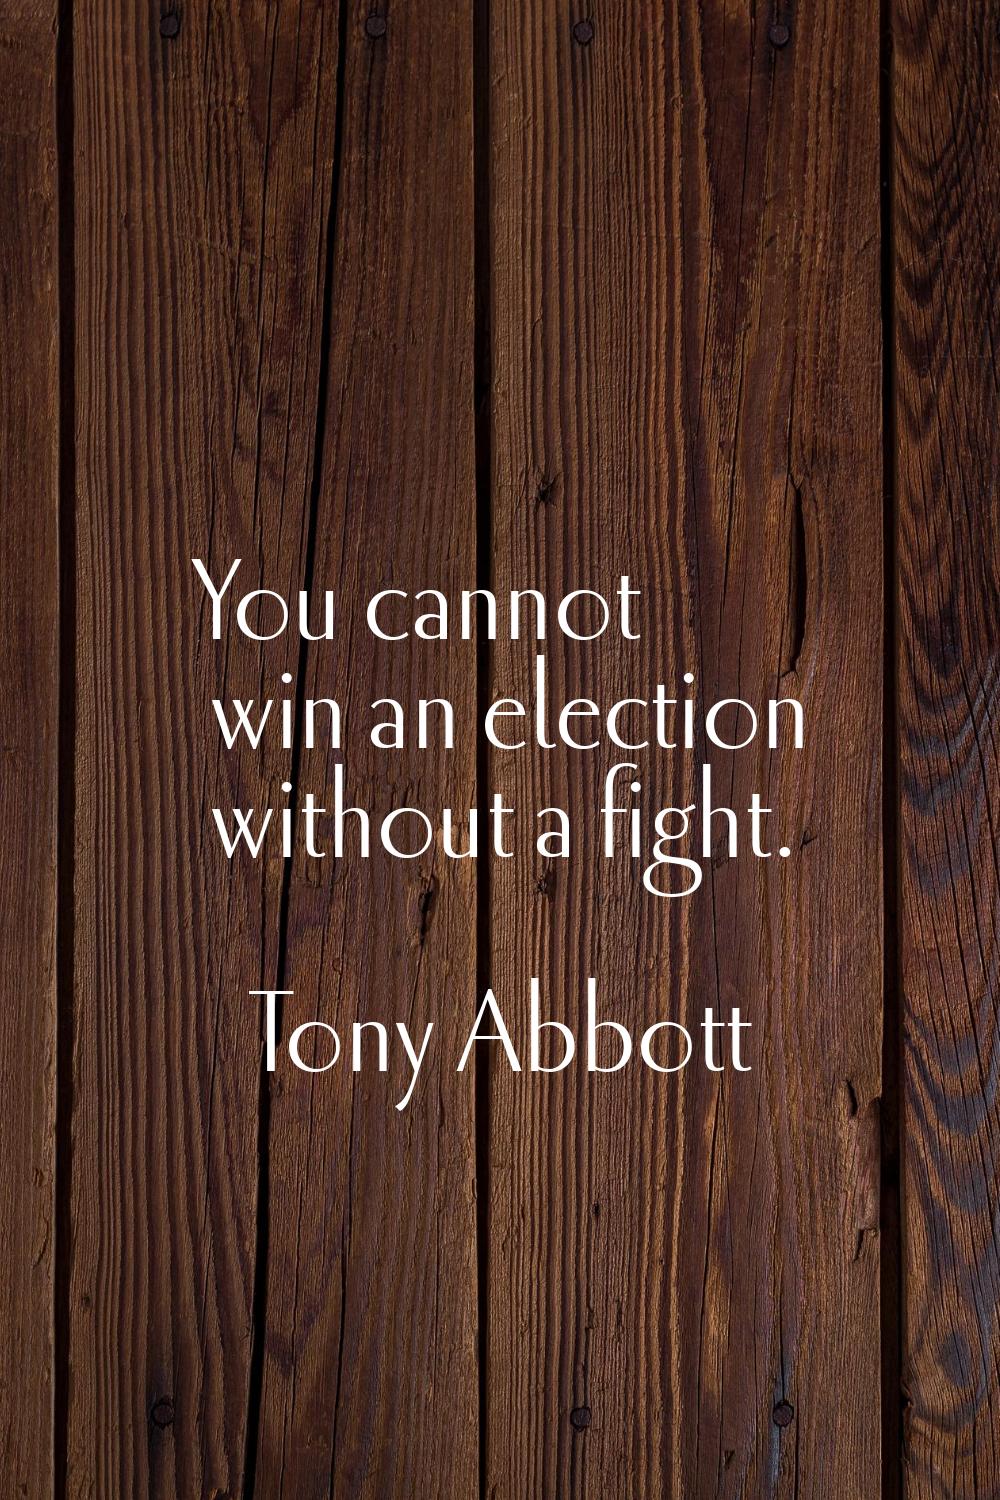 You cannot win an election without a fight.